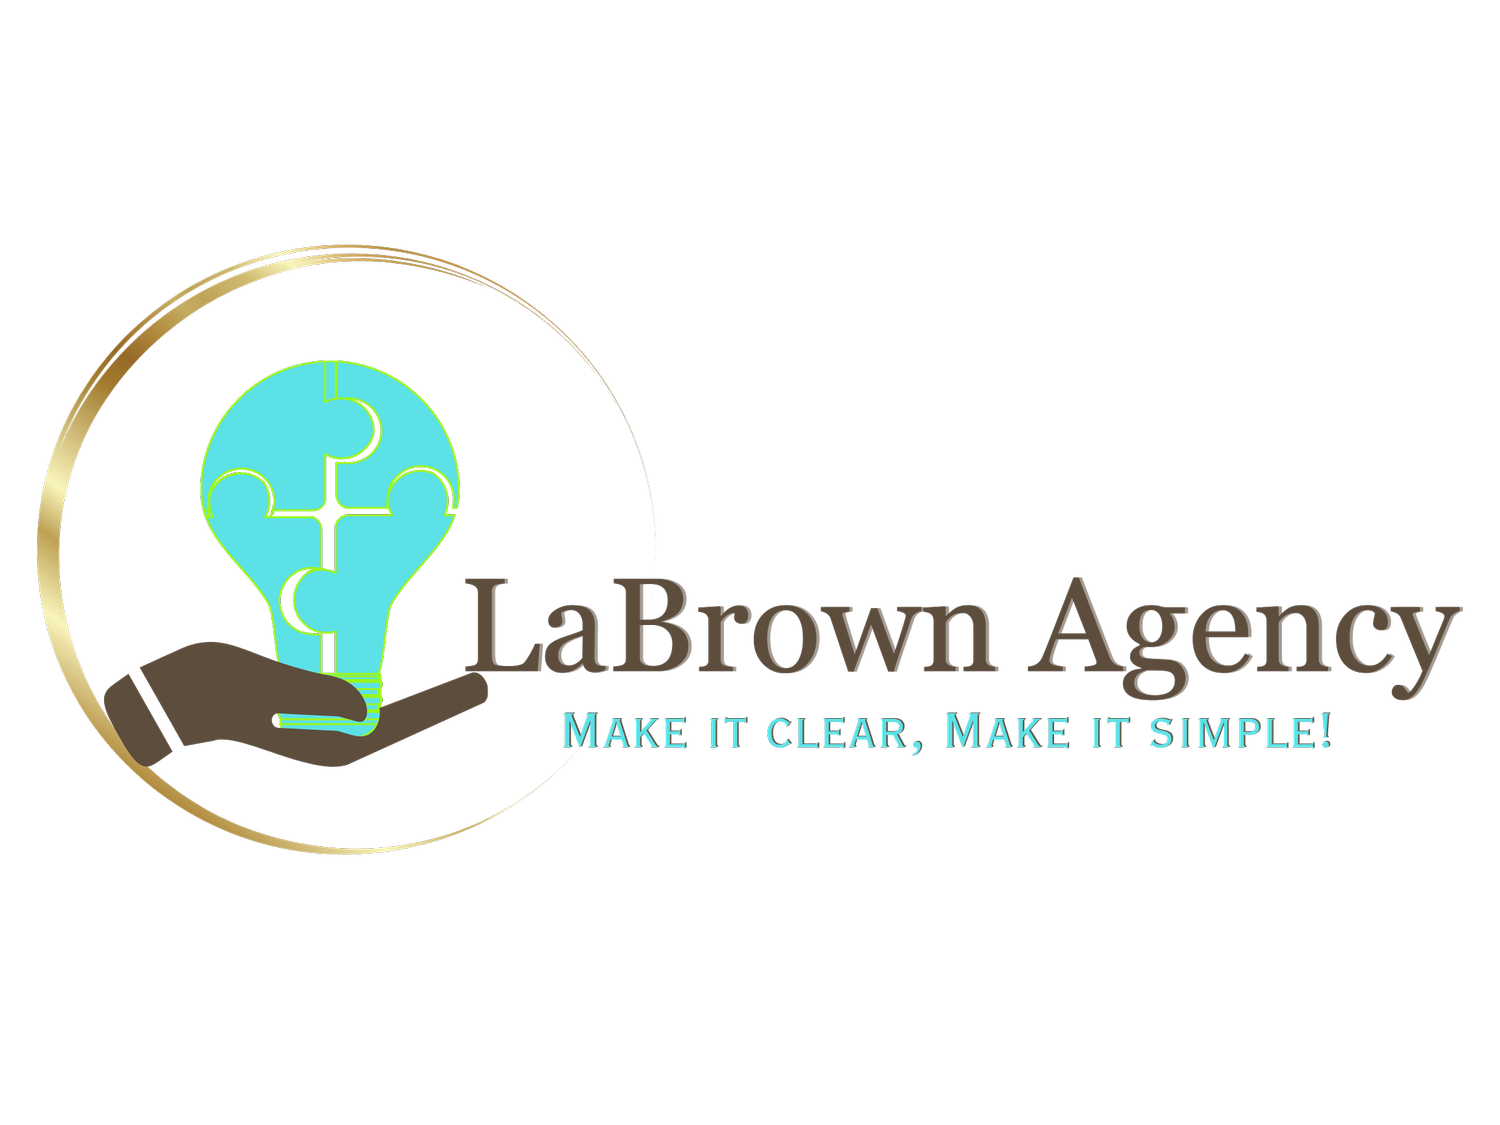 LaBrown Agency